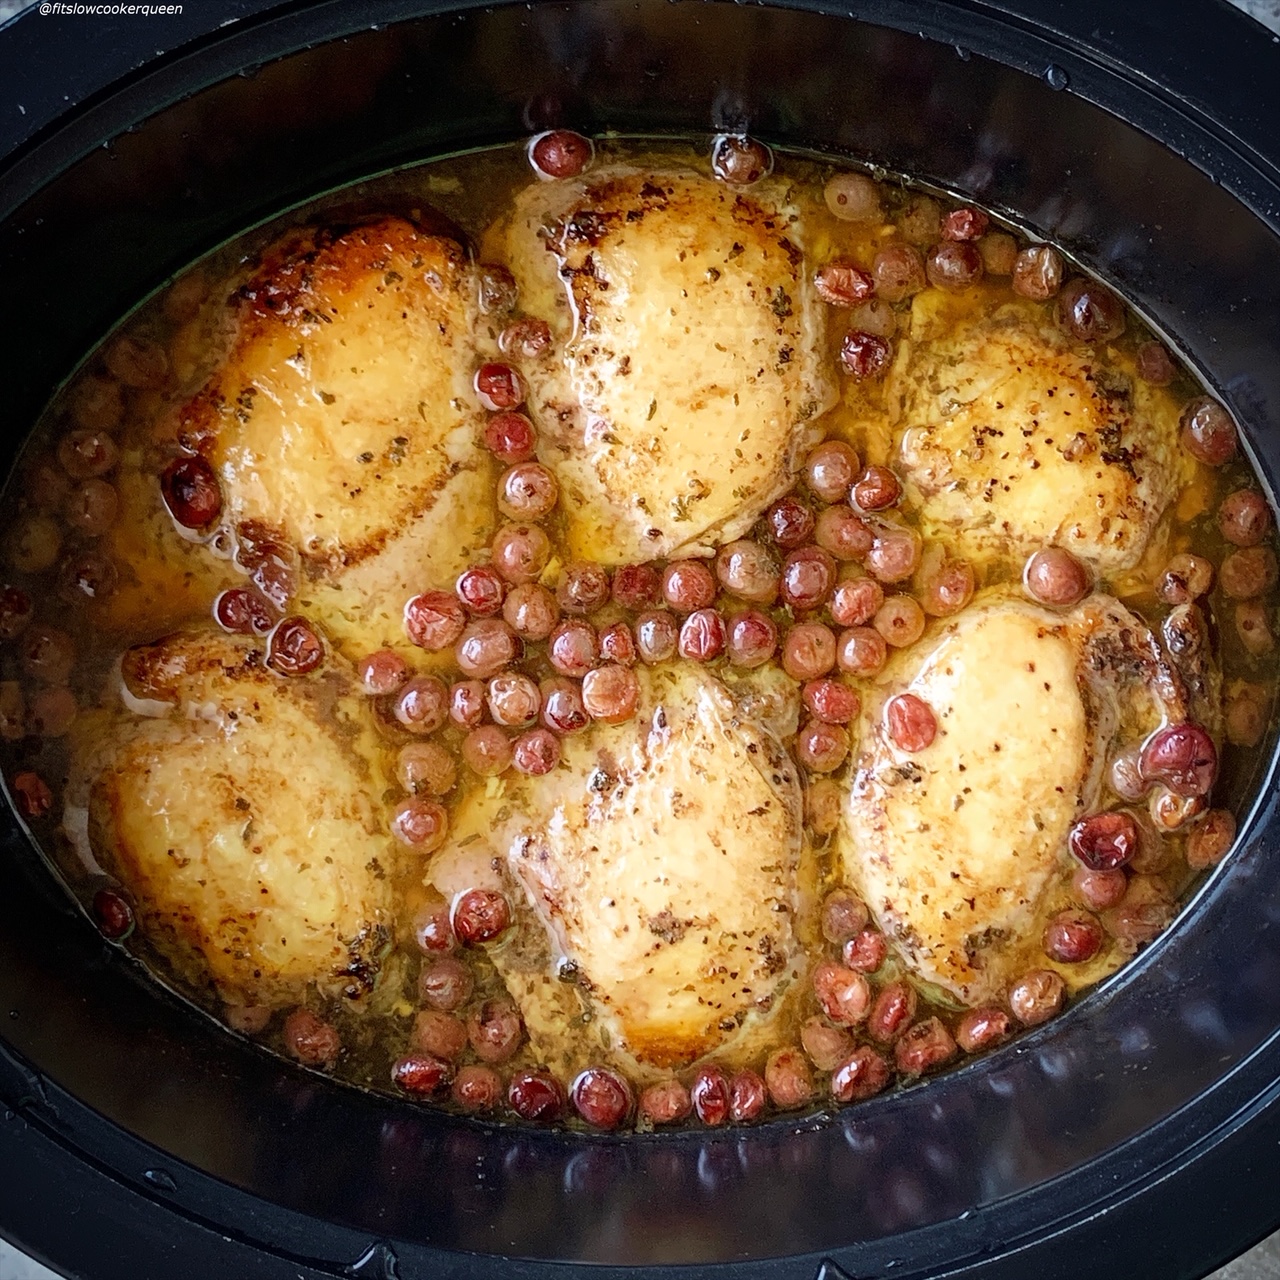 https://fitslowcookerqueen.com/wp-content/uploads/2019/01/SLOW-COOKERINSTANT-POT-BALSAMIC-CRANBERRY-CHICKEN-LOW-CARBPALEOWHOLE30-5.jpg